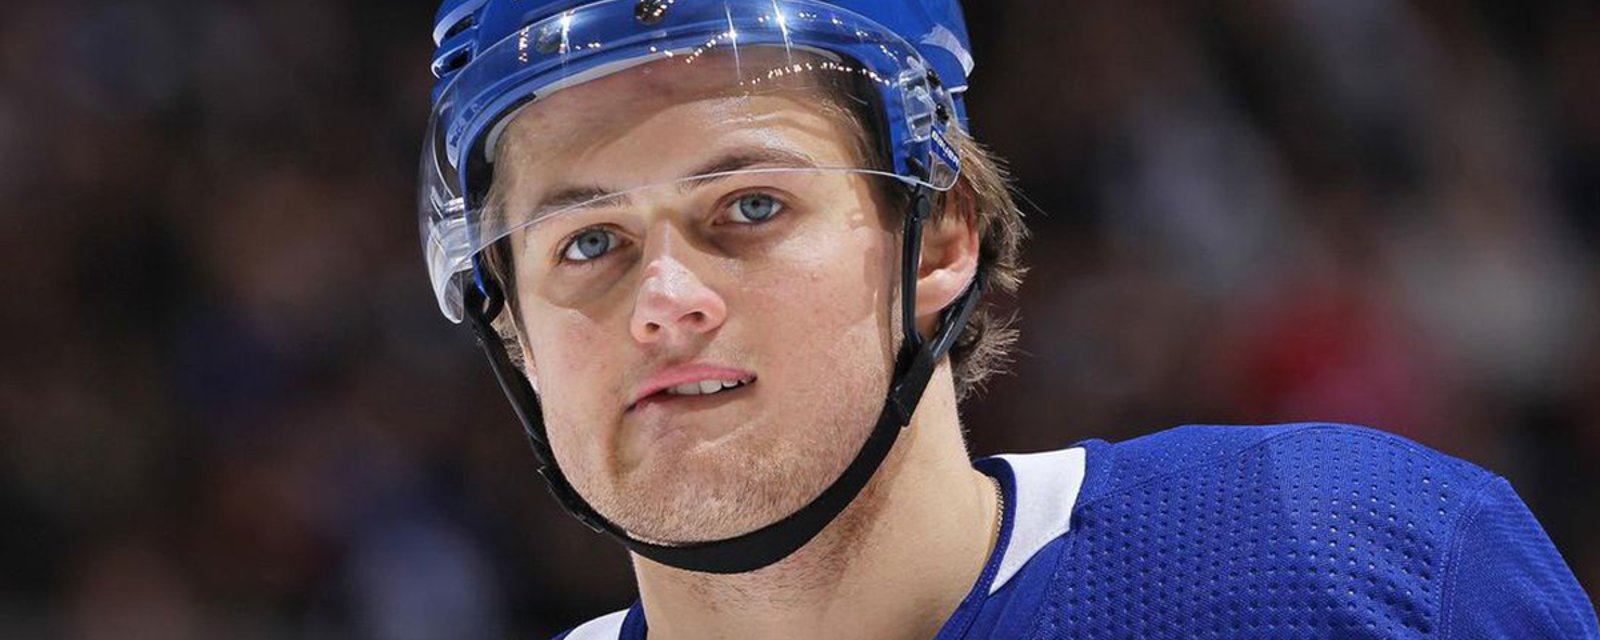 Report: Nylander’s time with Leafs “likely over”, trade coming